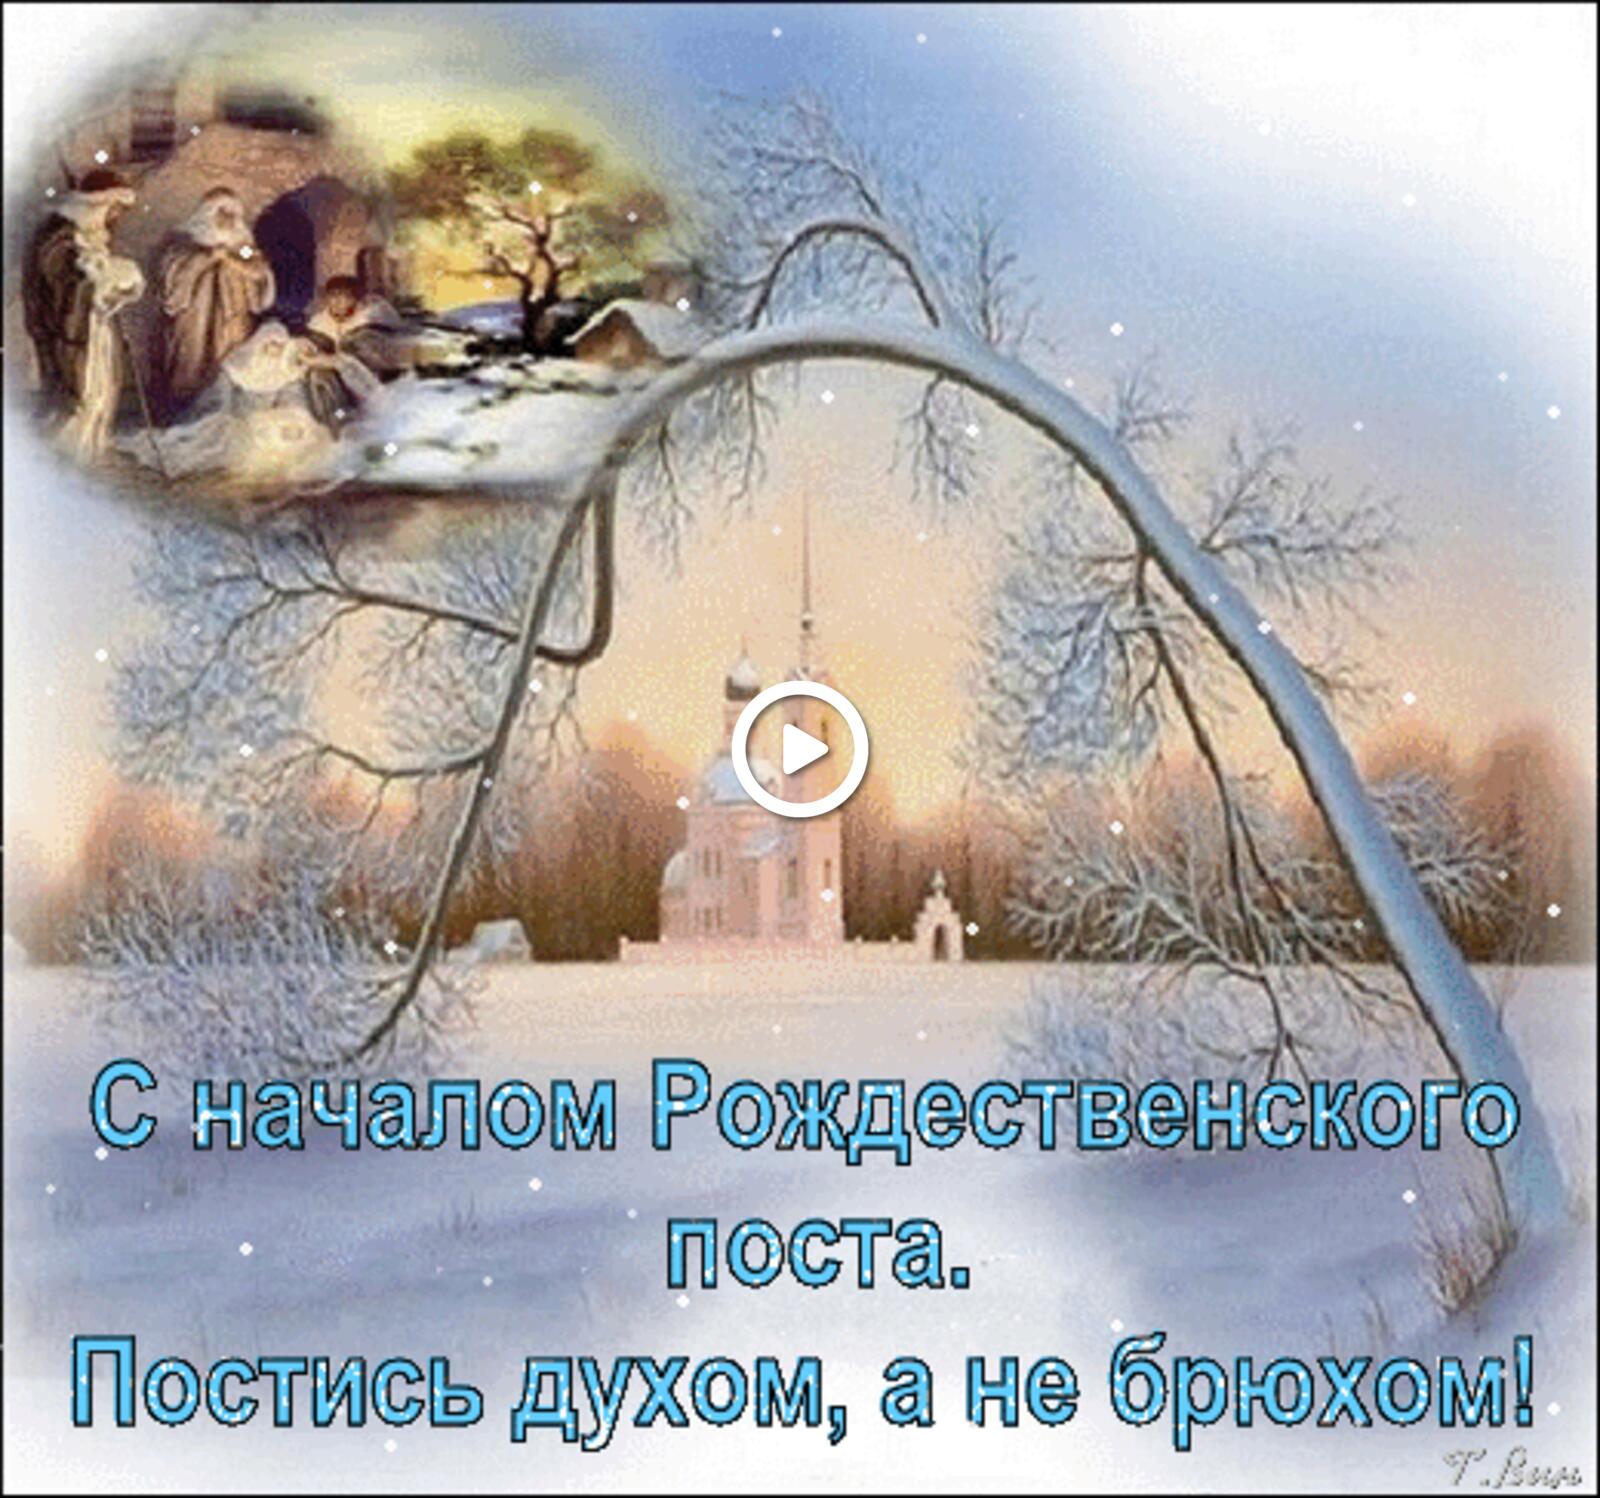 A postcard on the subject of orthodox christmas lent winter snow for free